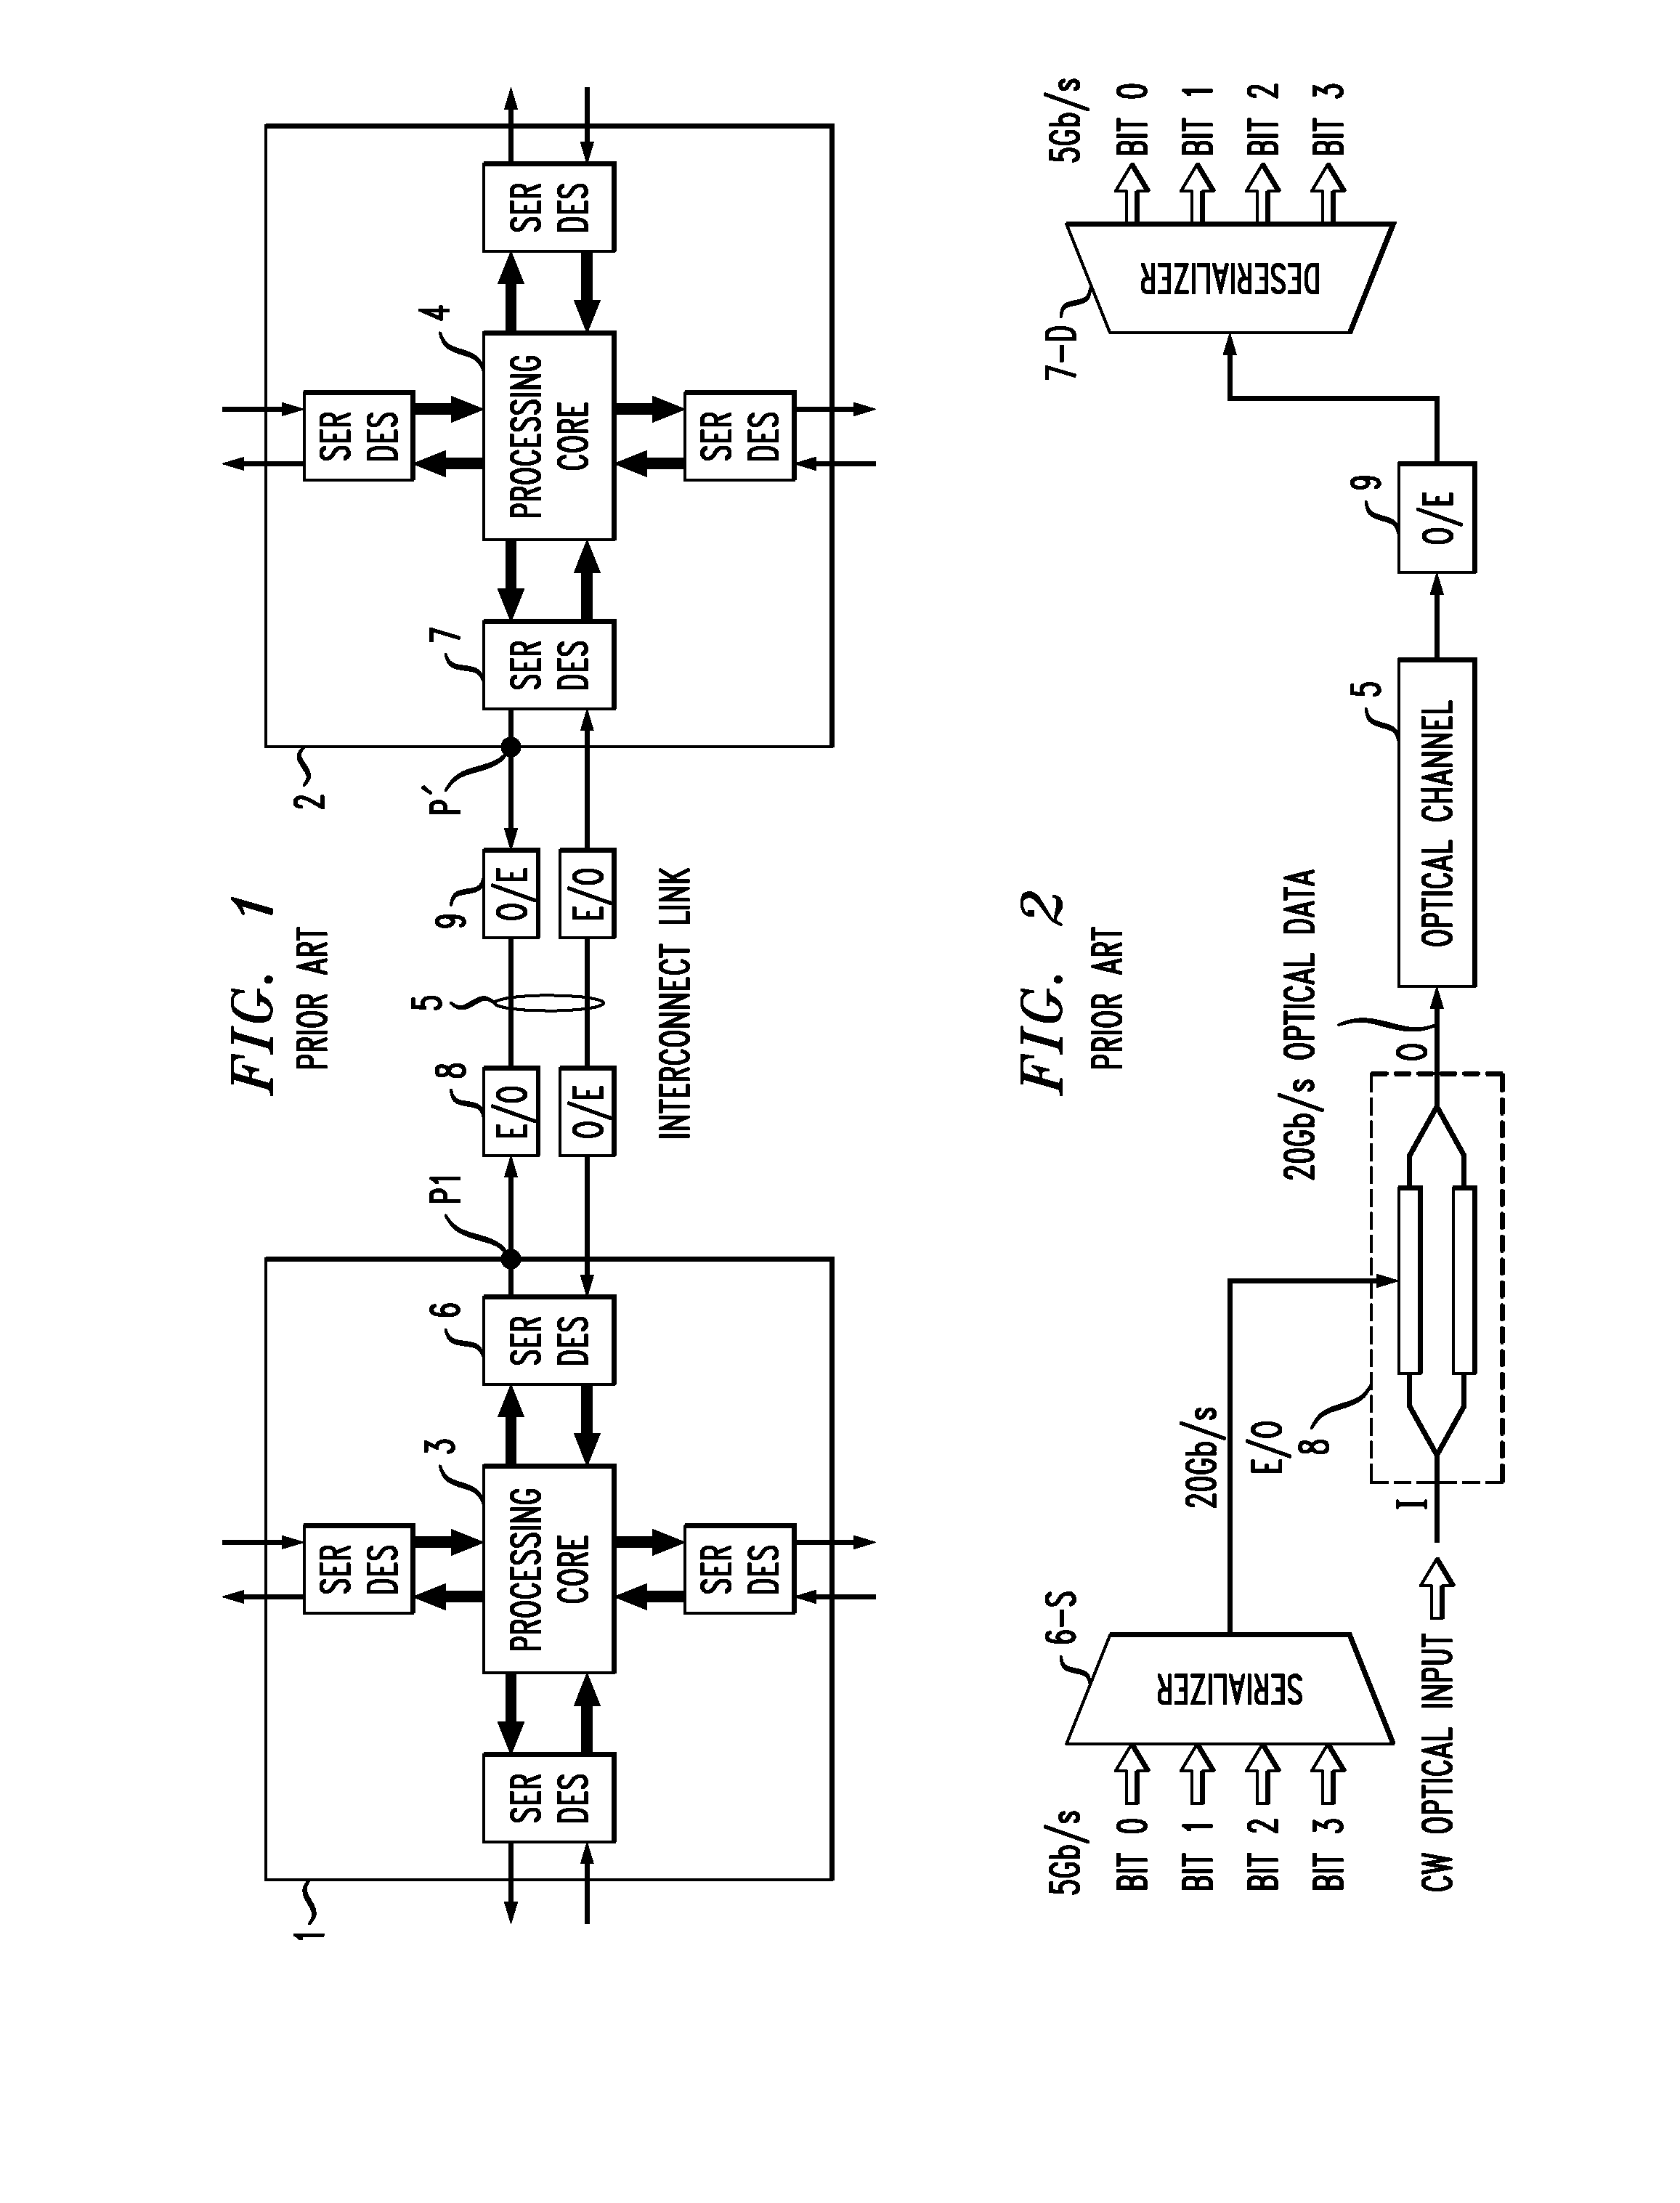 Optical Interconnection Arrangement For High Speed, High Density Communication Systems